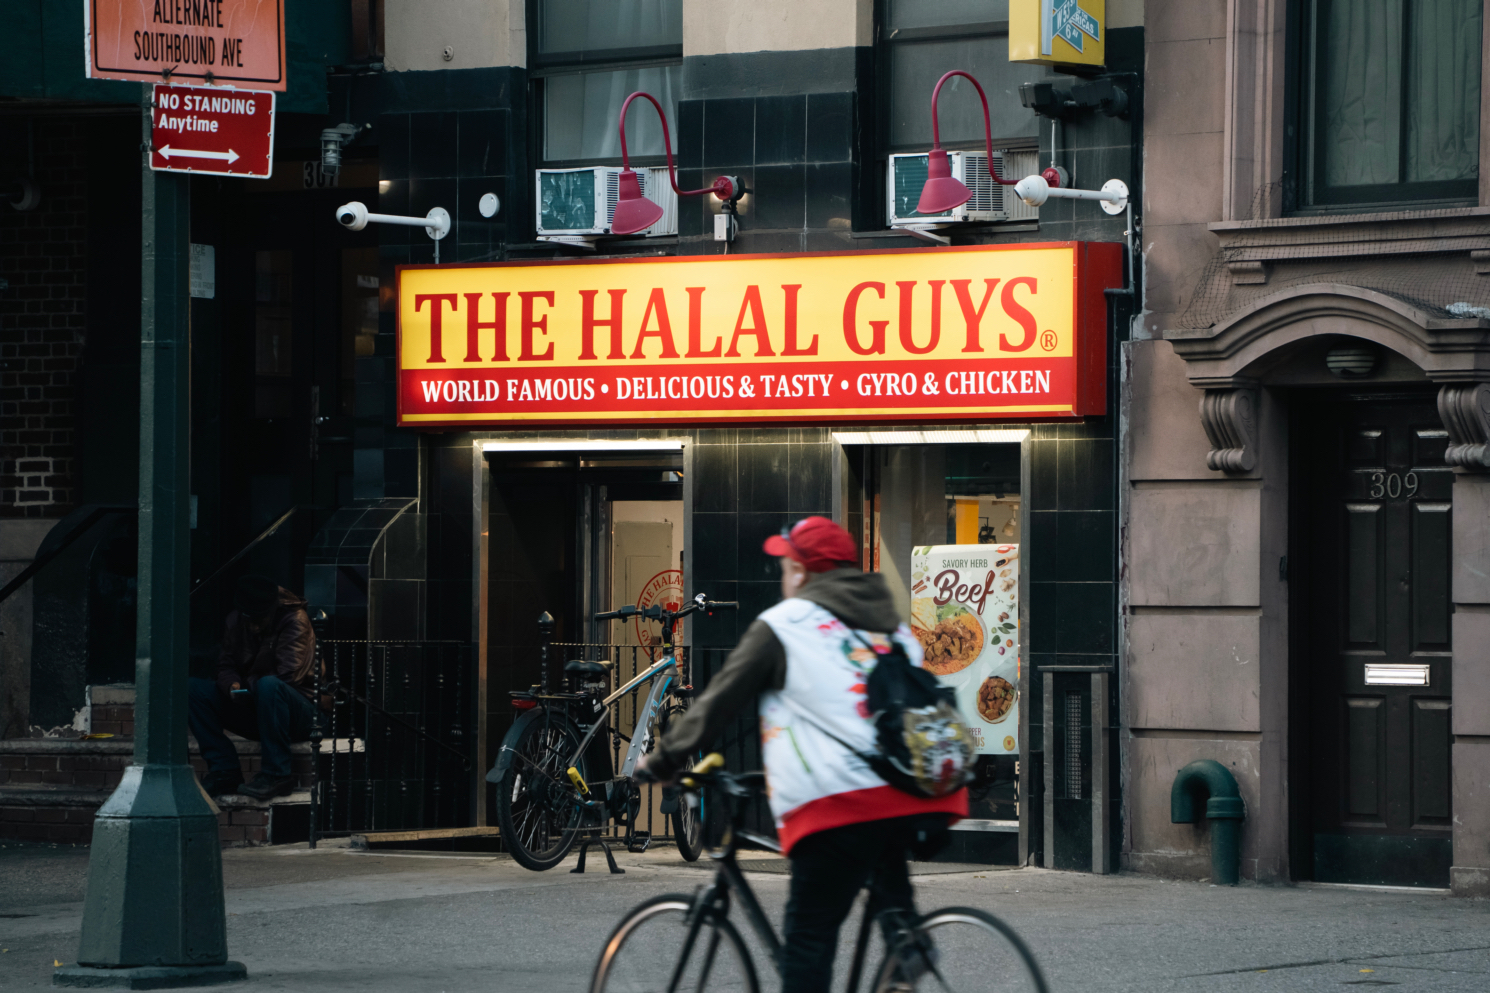 A man on a bike passes by the exterior of The Halal Guys, located on 307 E. 14th Street.